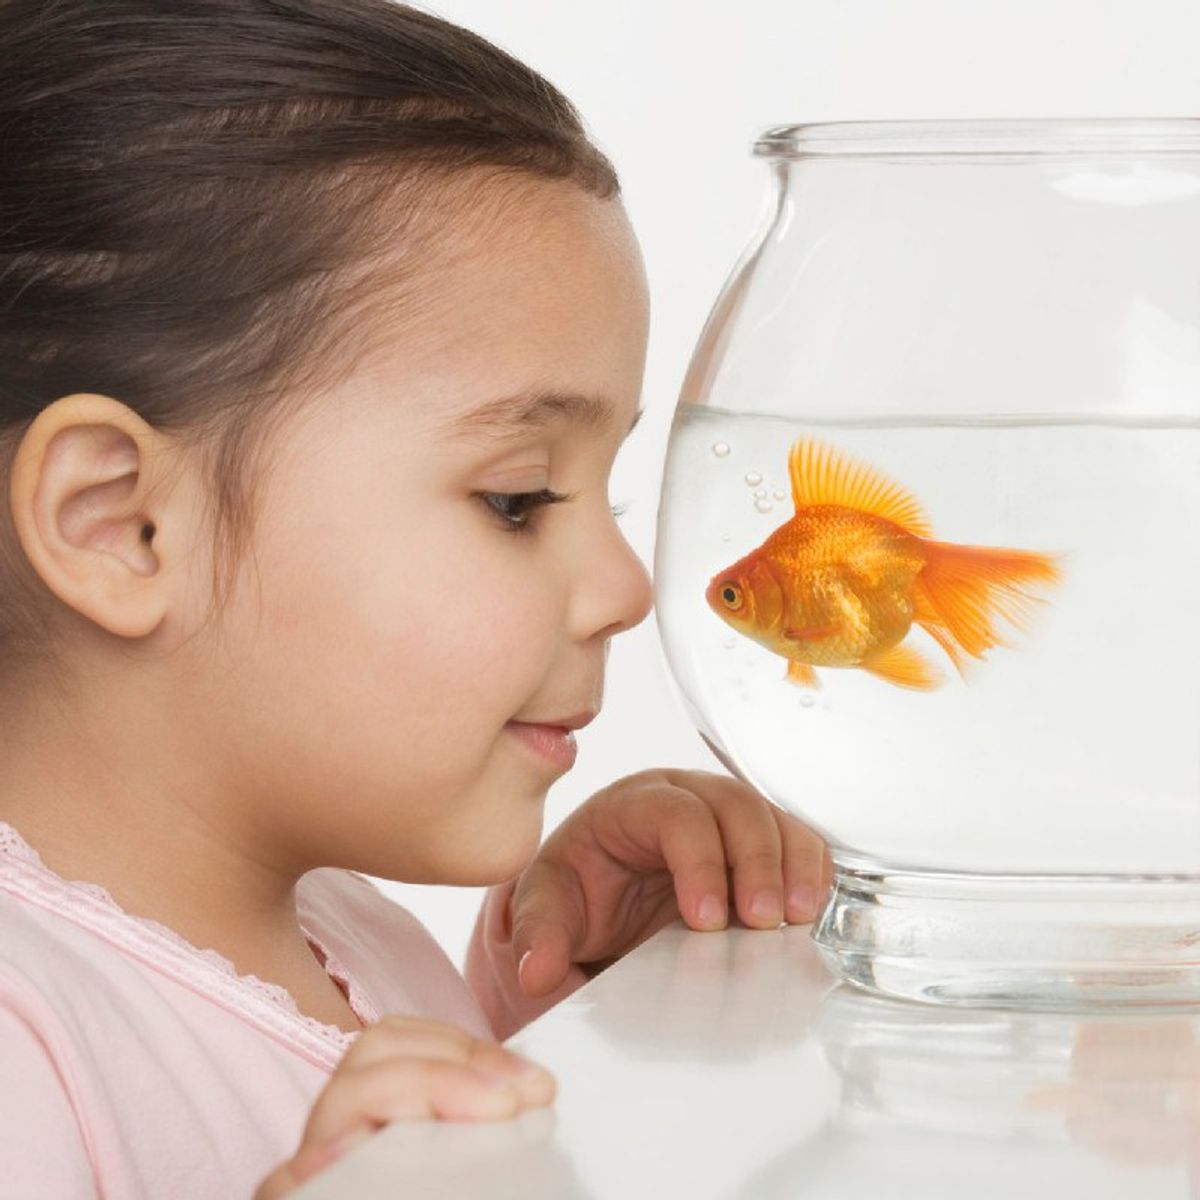 What I Learned From Getting A Fish In College